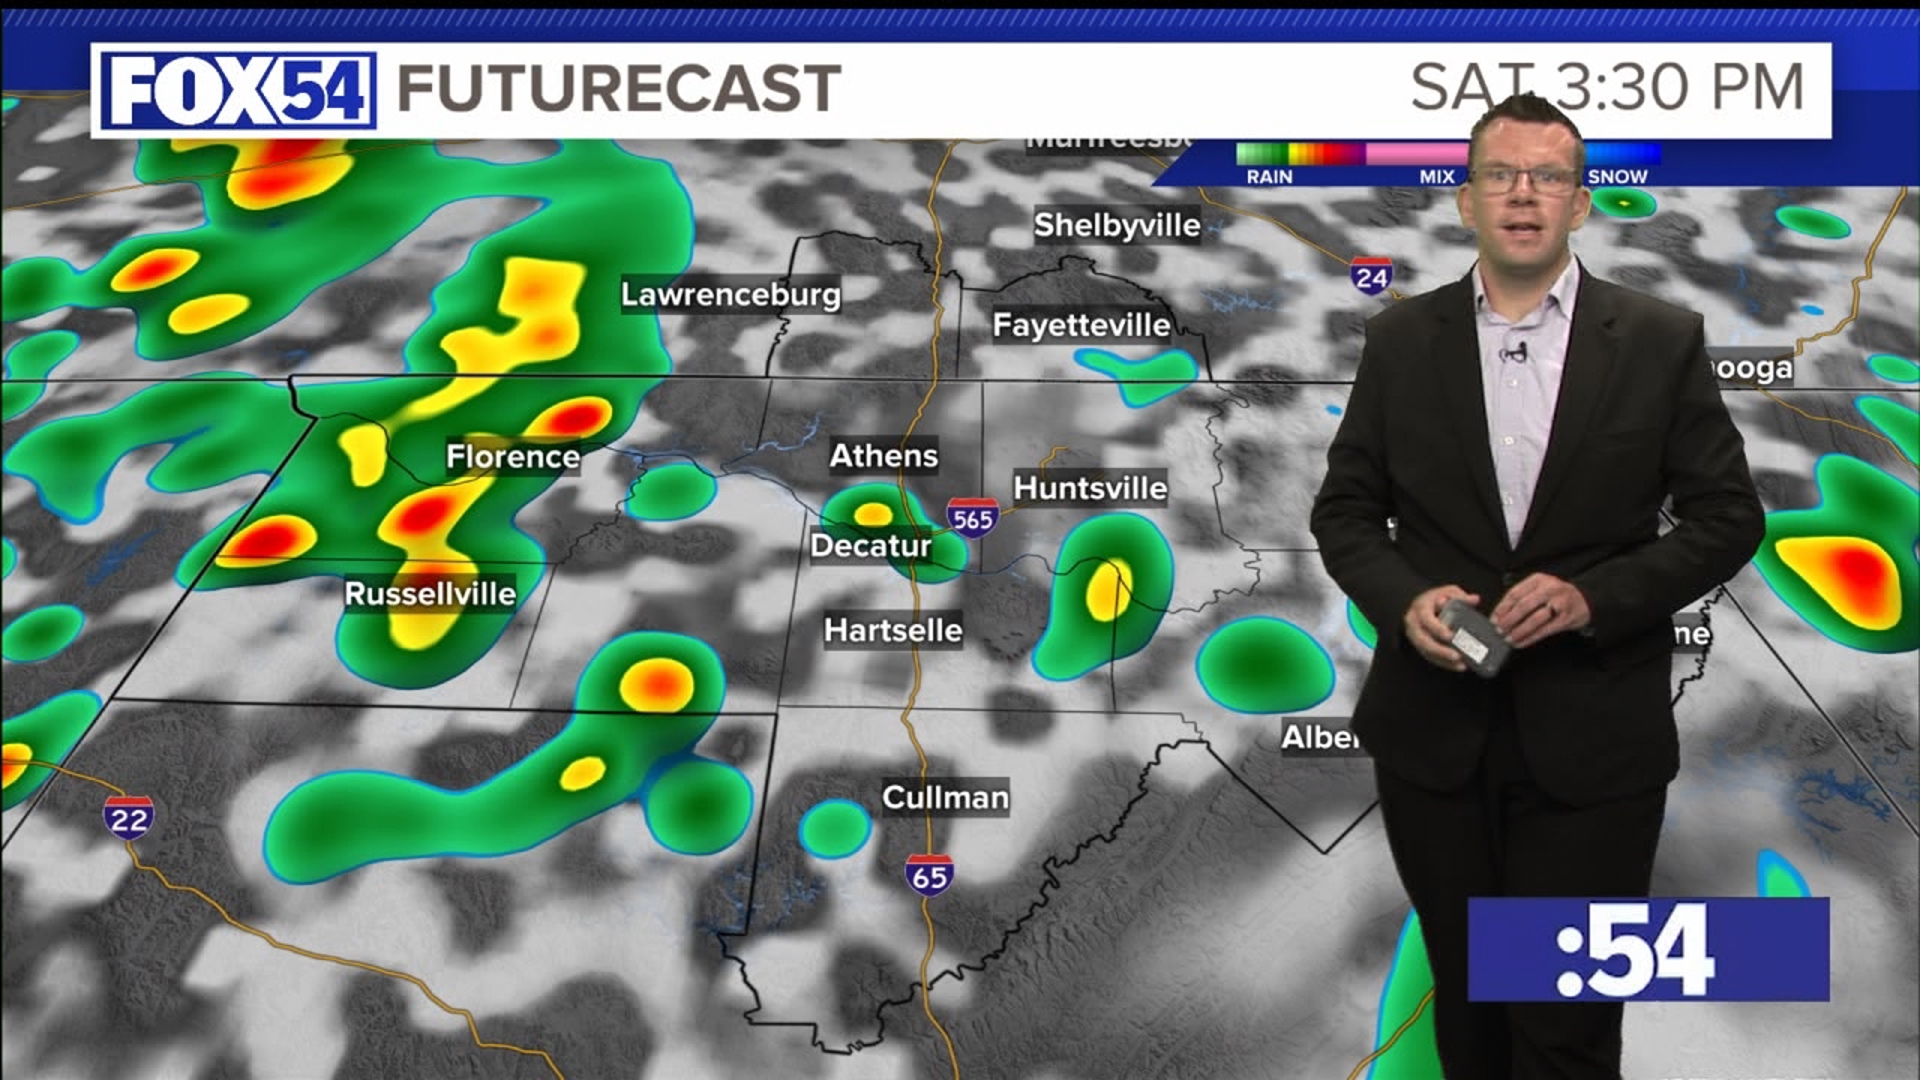 Will the weekend be a washout? Jordan has your full forecast tonight at 5:30 and 9:00.